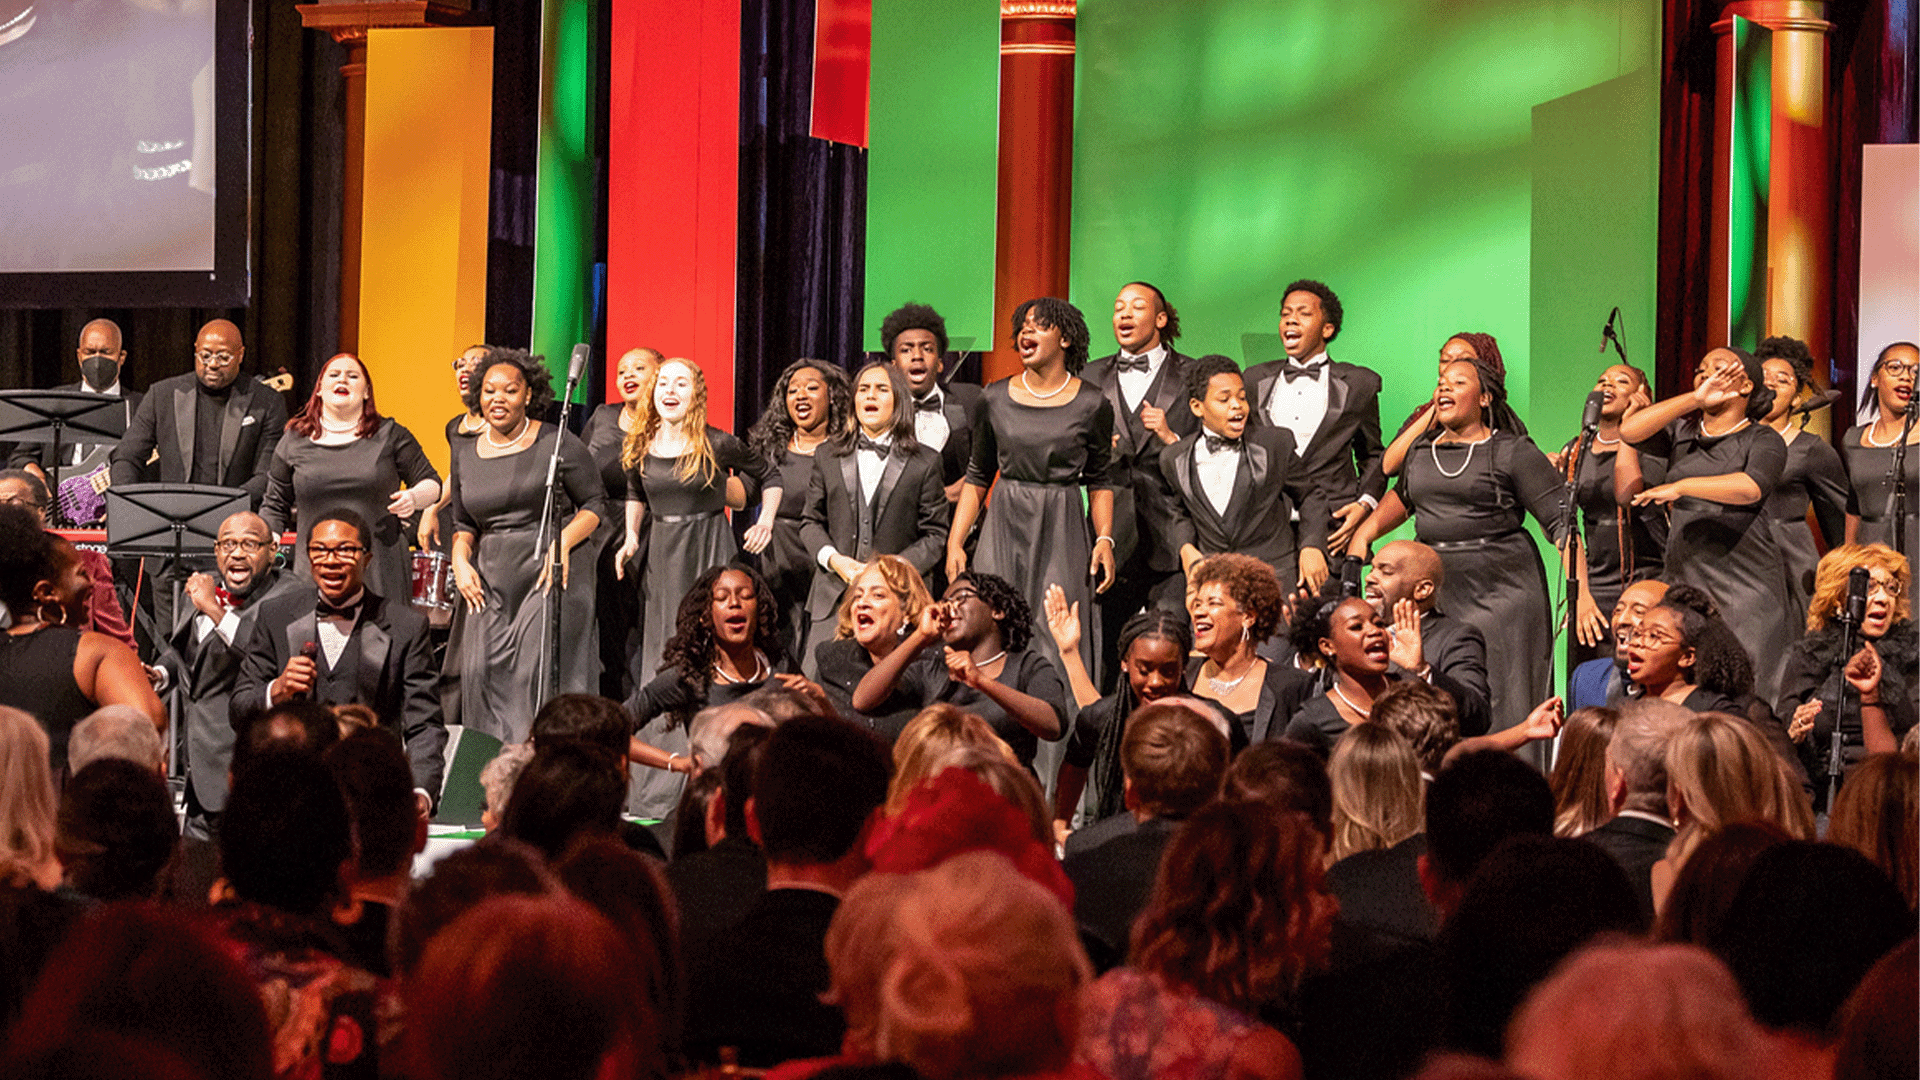 A photo of COTG performing at the Washington Performing Arts gala. Links to event page.